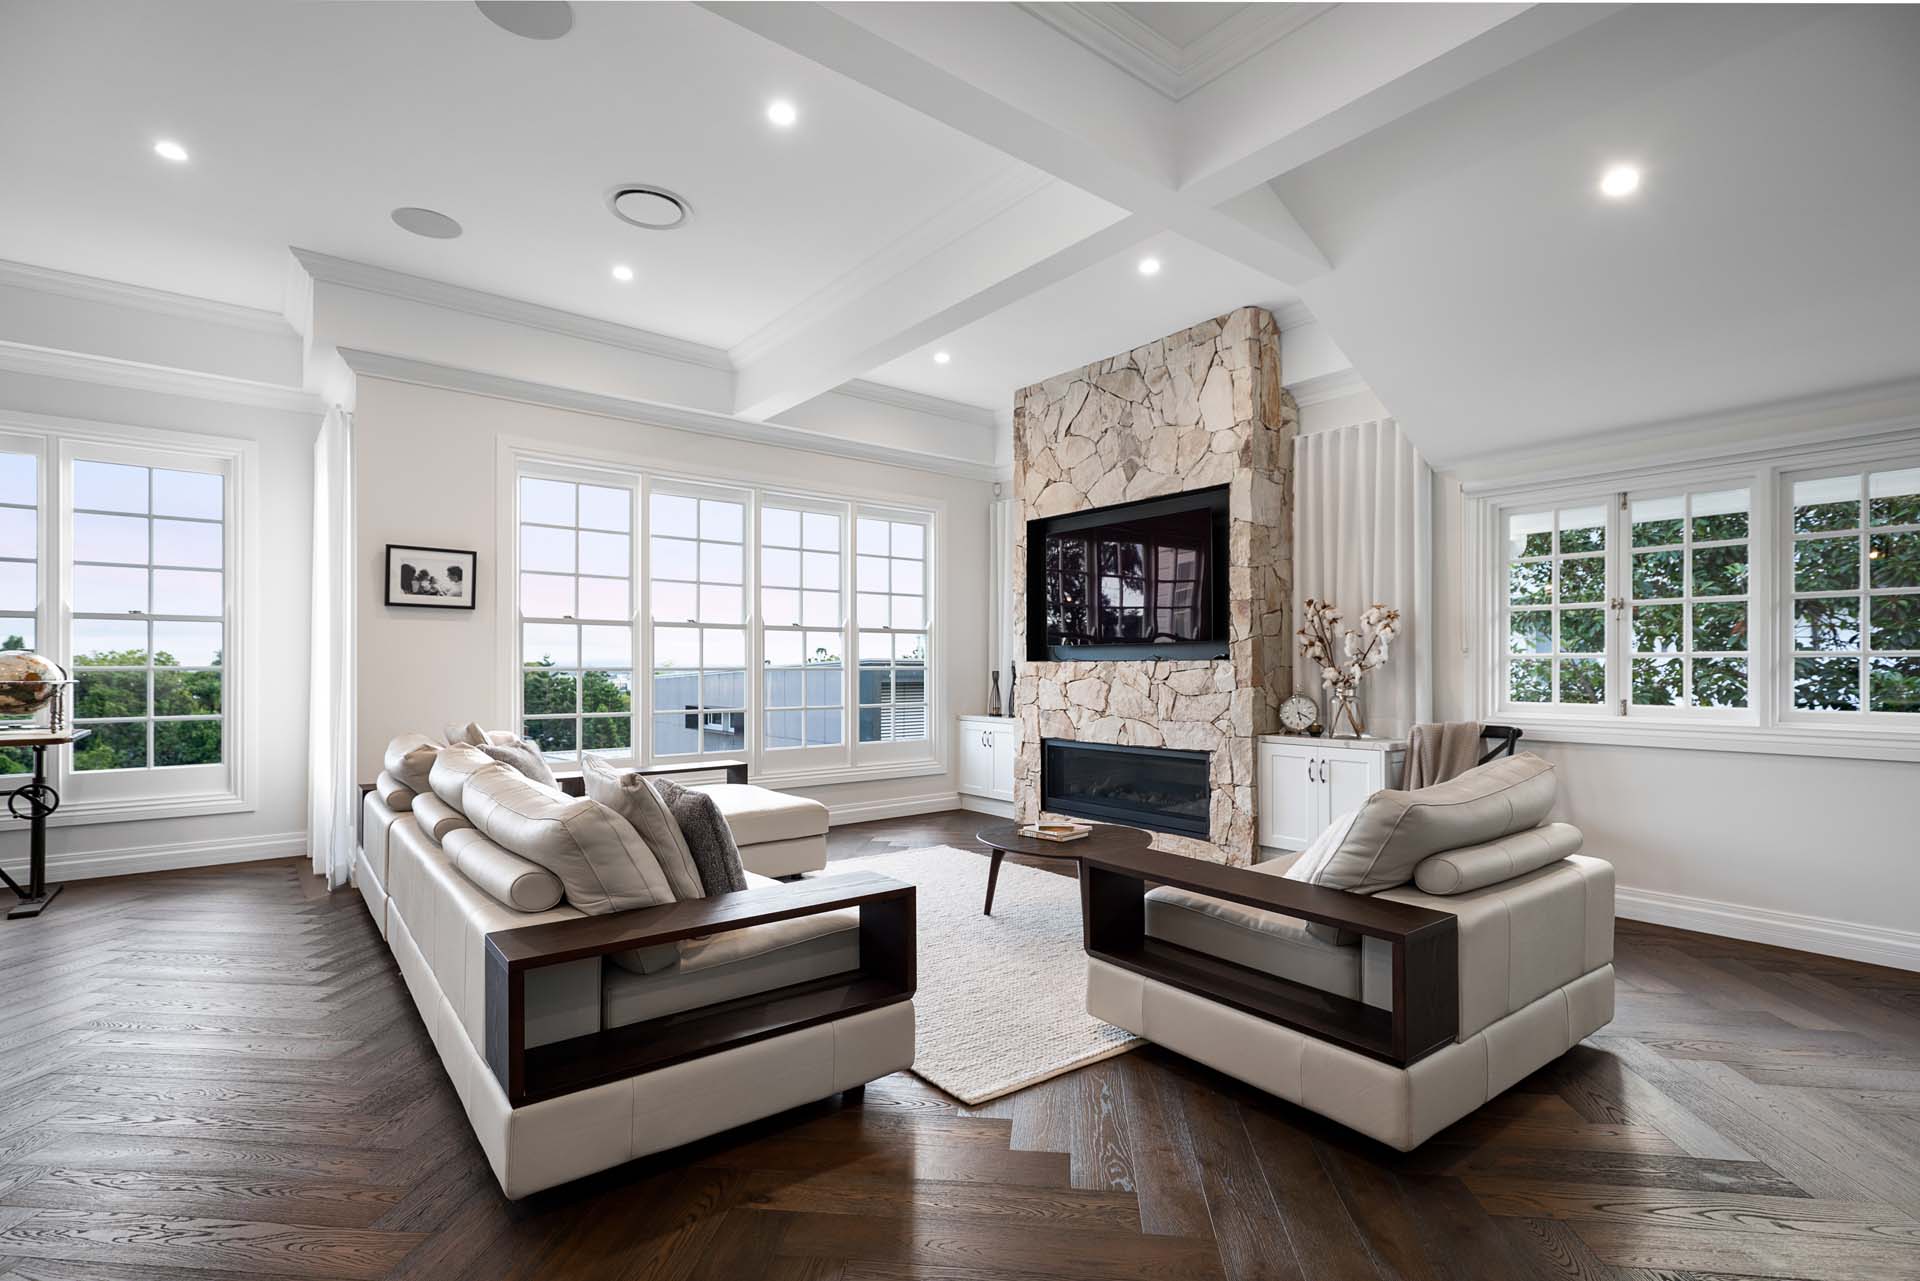 Interior of Modern Family Home and Living Room | Featured image for the blog How to Pick Shutters for Your House from Blindo.